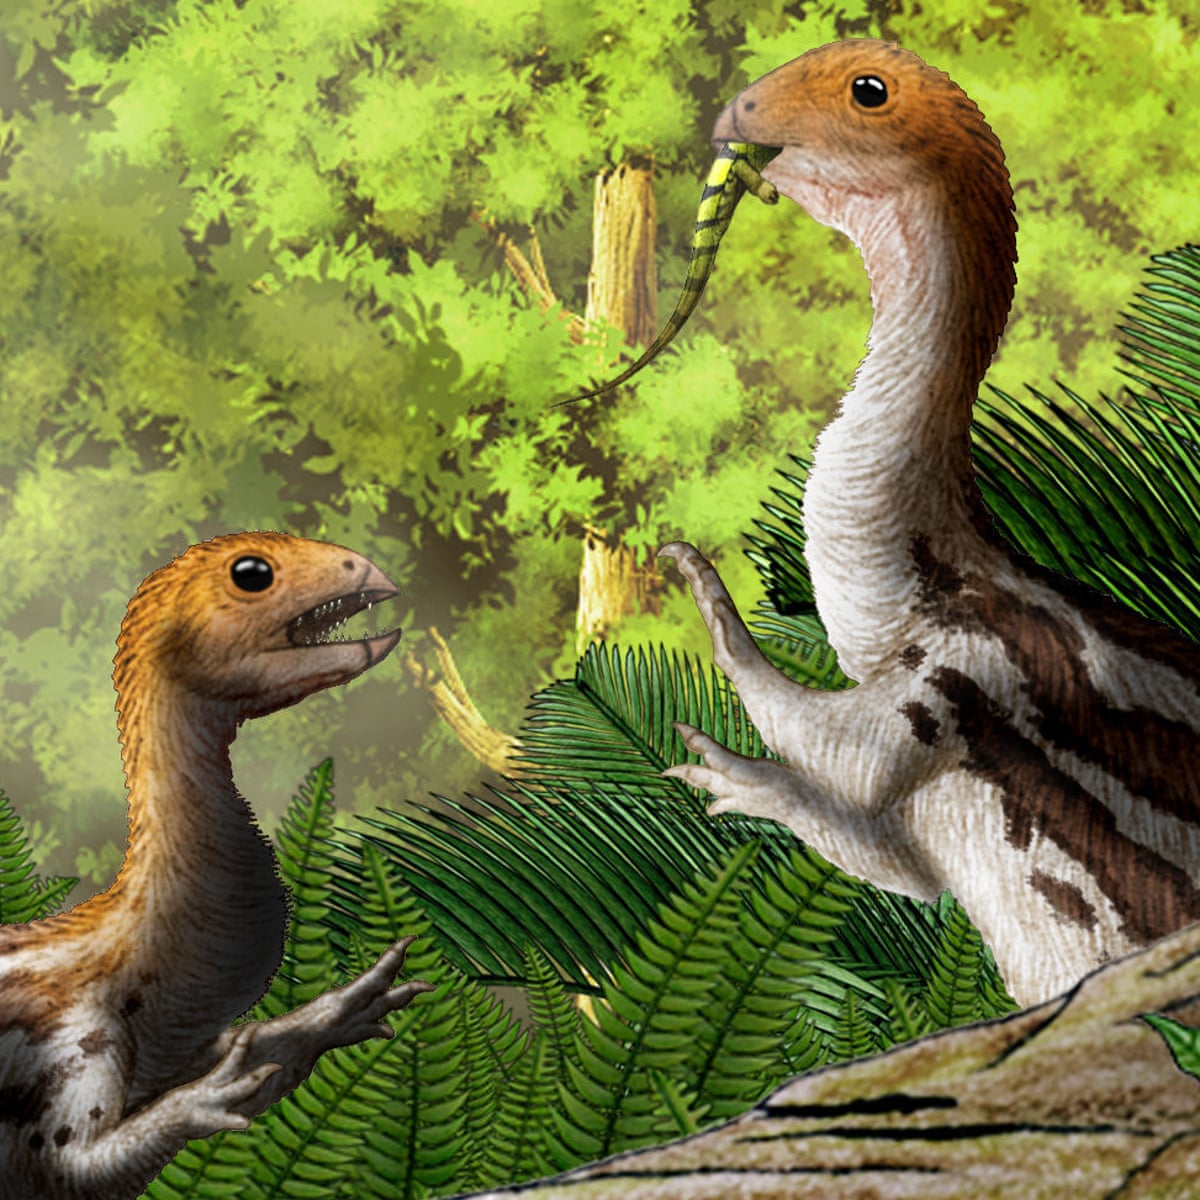 Pecking order: toothless dinosaur points way to evolution of the beak |  Dinosaurs | The Guardian